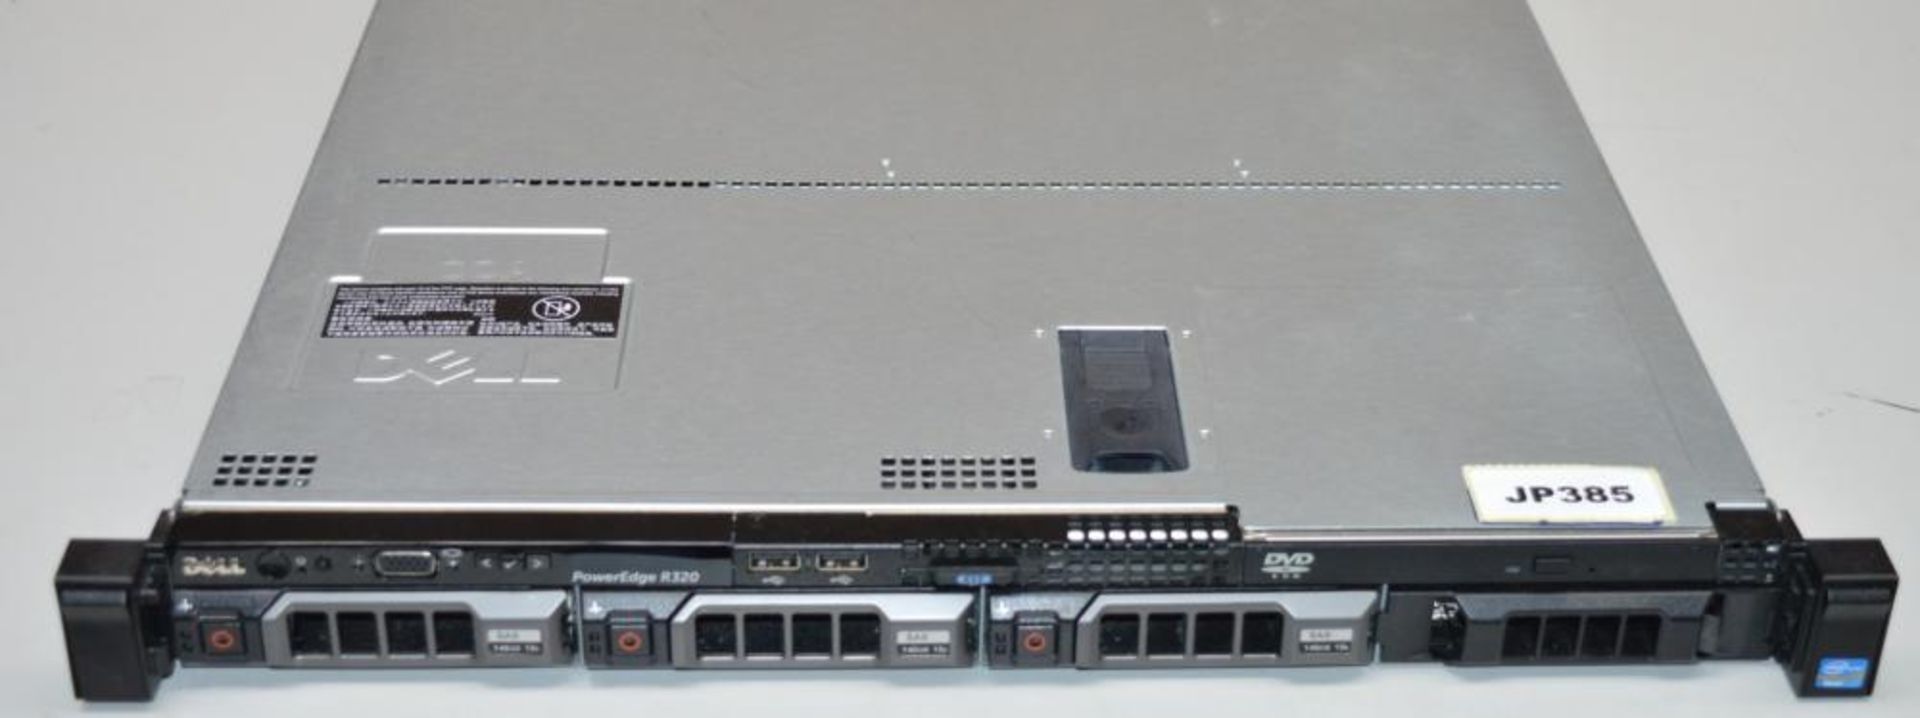 1 x Dell PowerEdge R320 Rack Mount Server - Features Intel Xeon E5-2407 Quad Core Processor and 4gb - Image 4 of 5